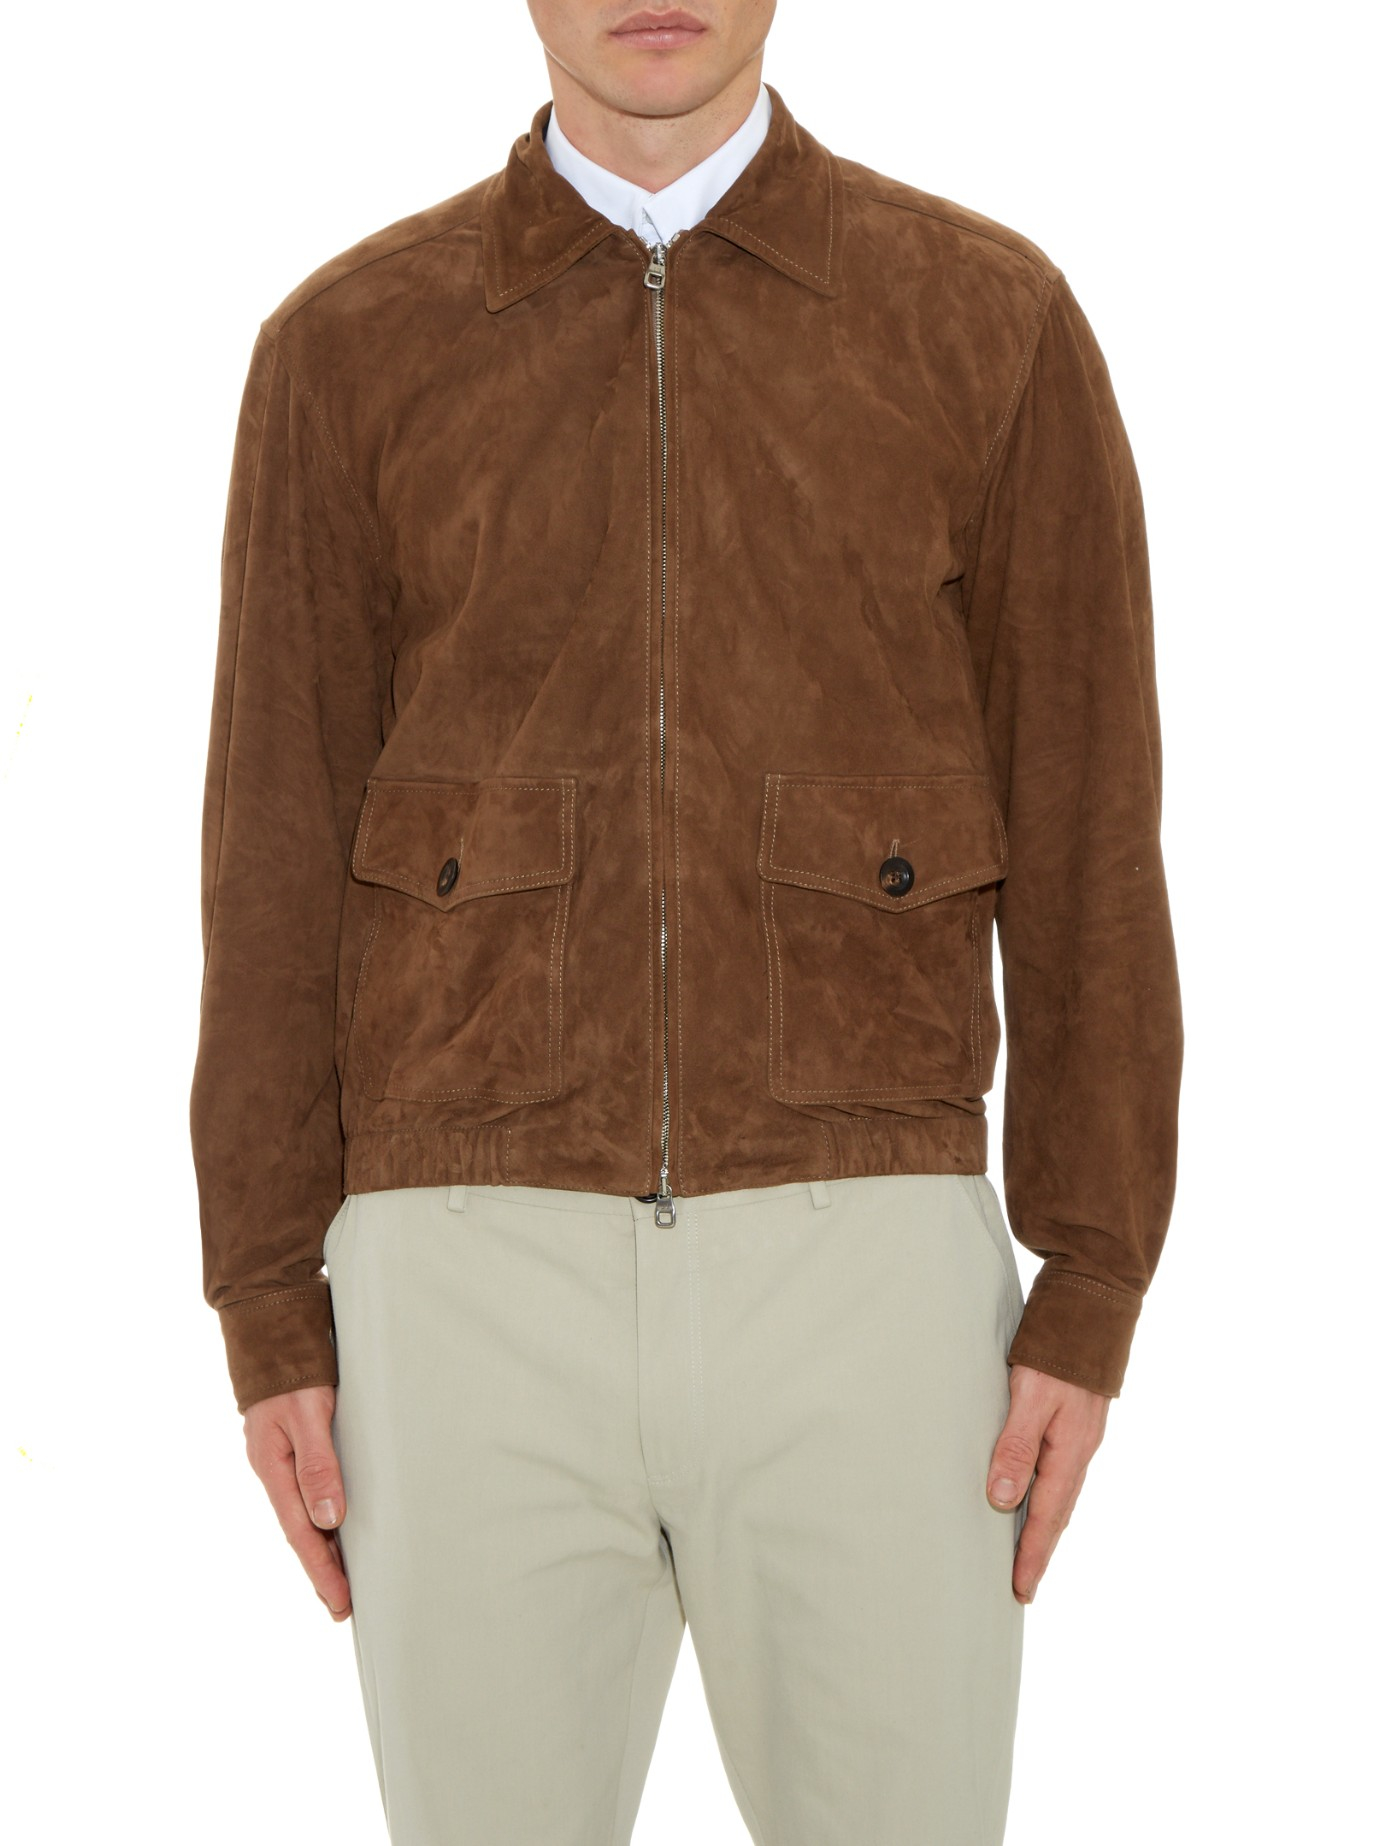 [Image: dunhill-tan-suede-jacket-brown-product-1...ormal.jpeg]